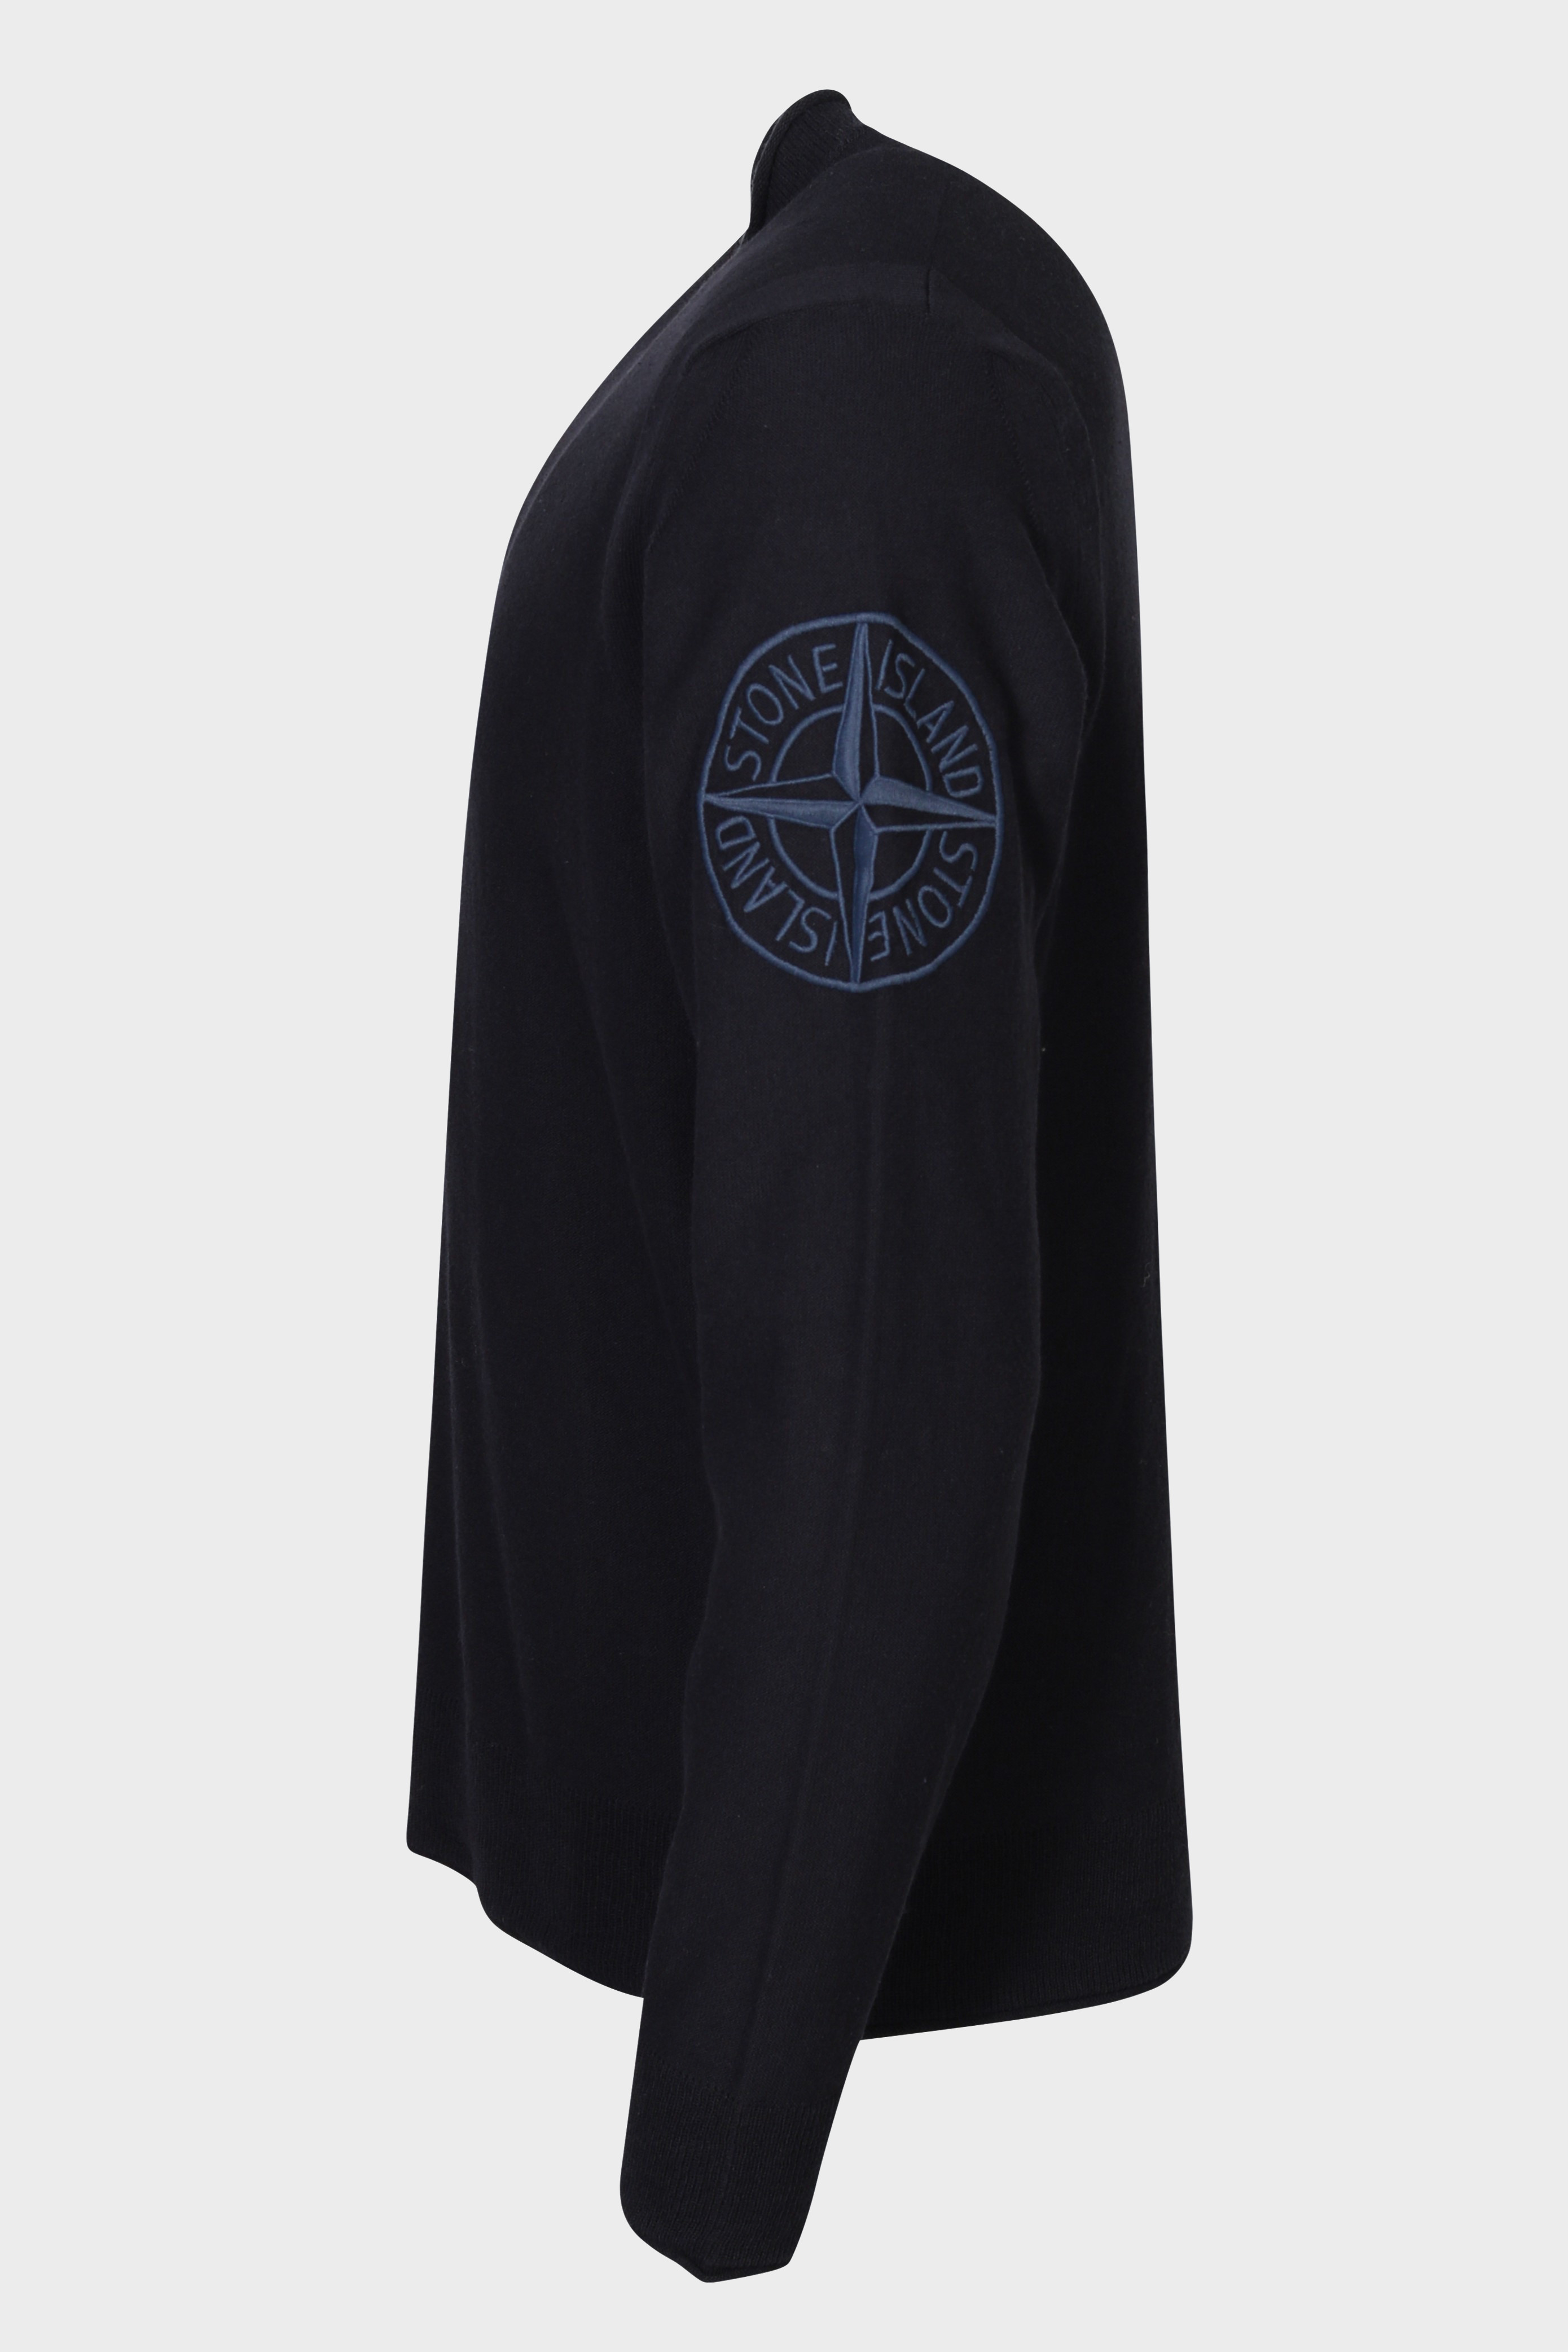 STONE ISLAND Cotton Knit Pullover in Navy M